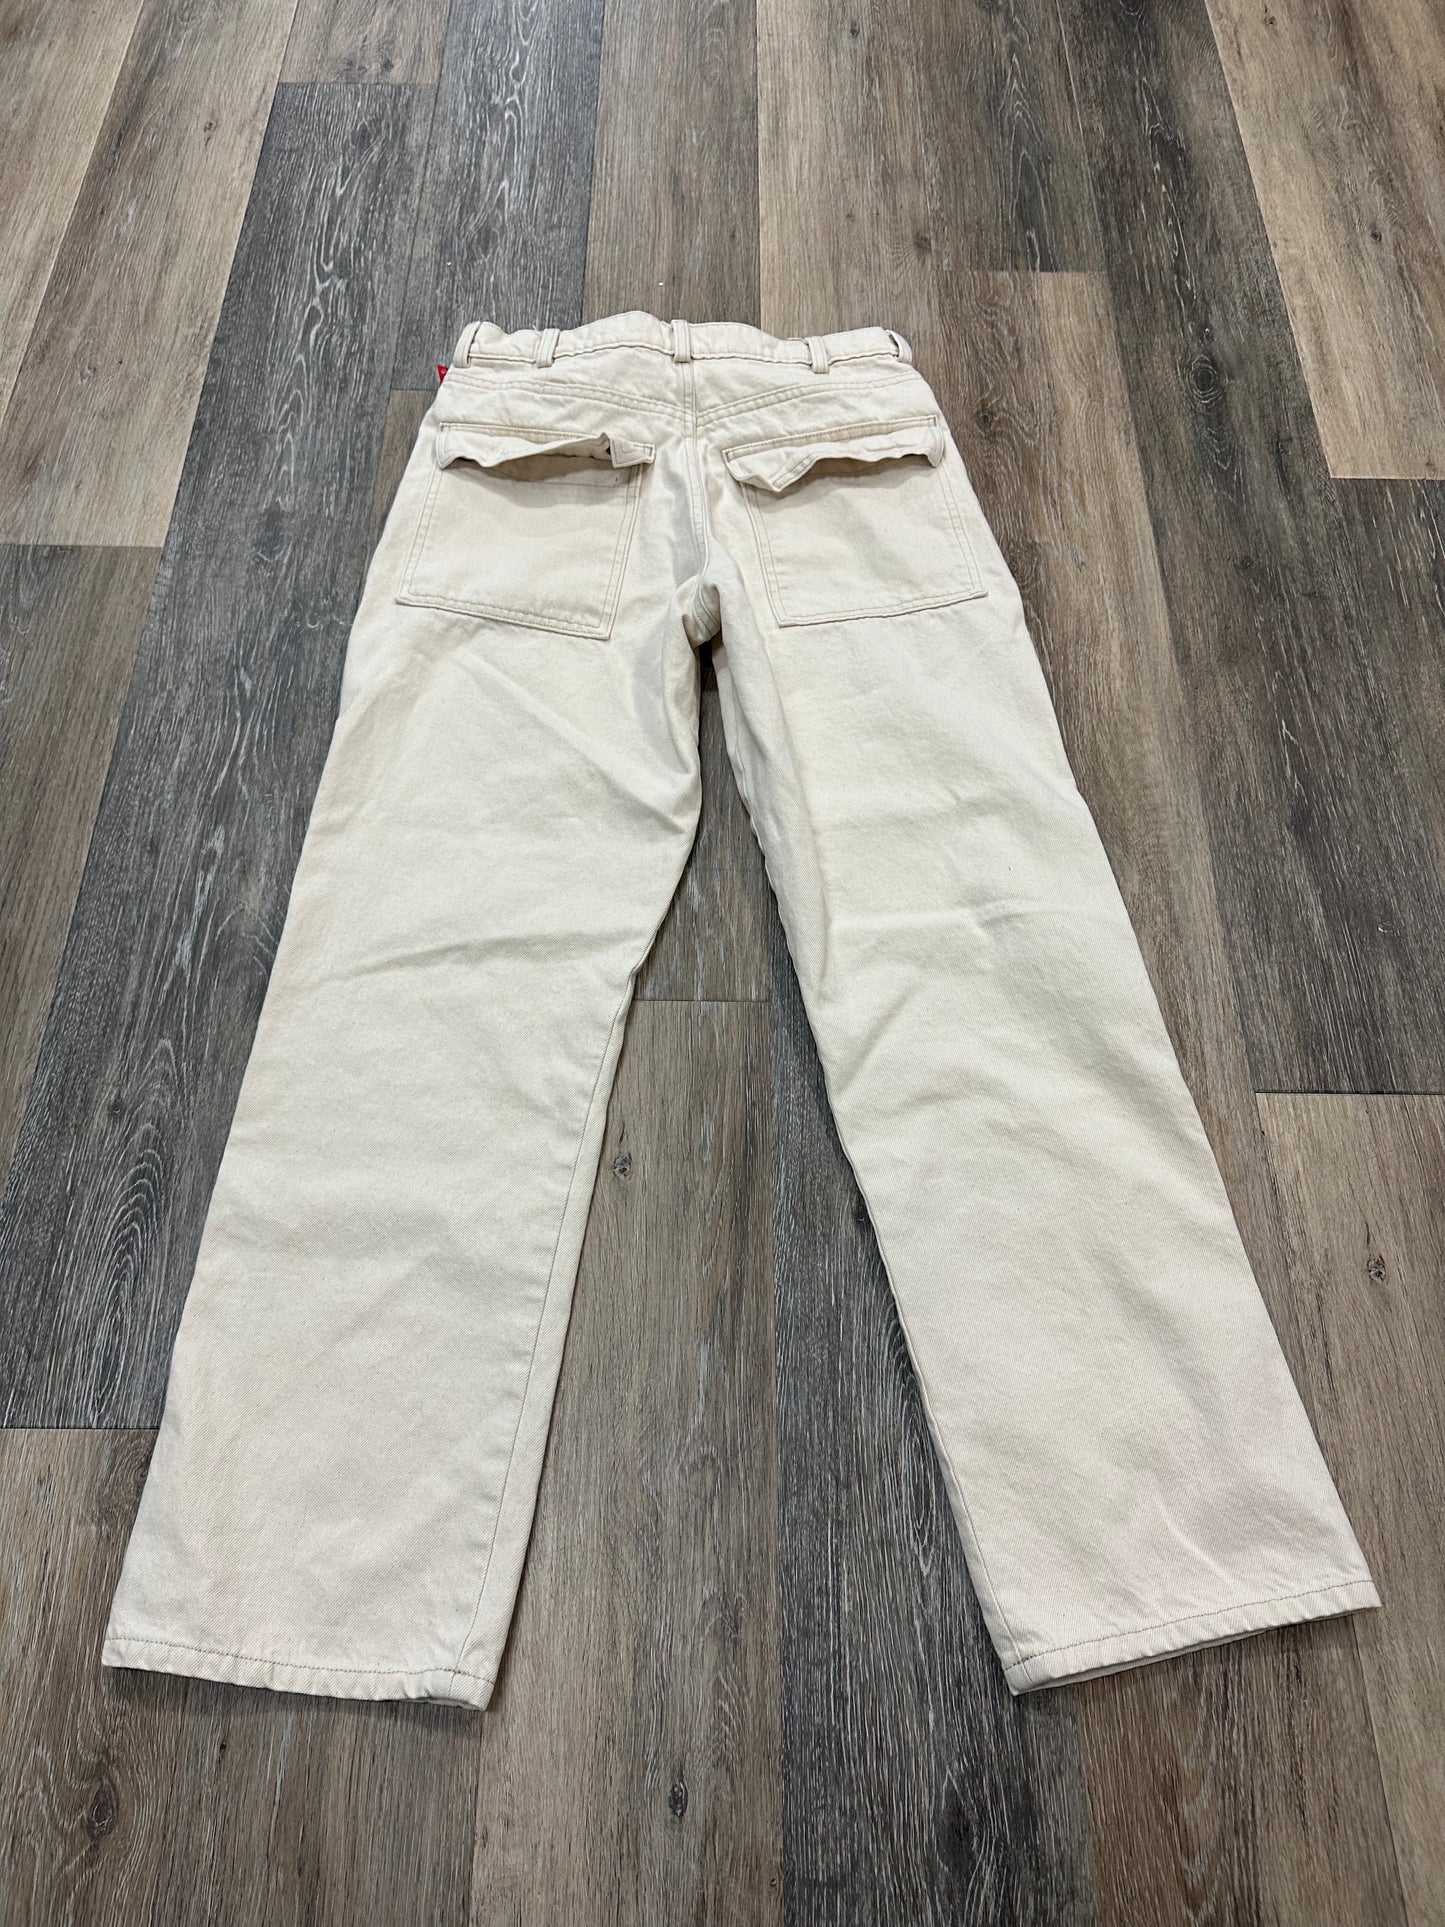 Pants Other By Banana Republic  Size: 4